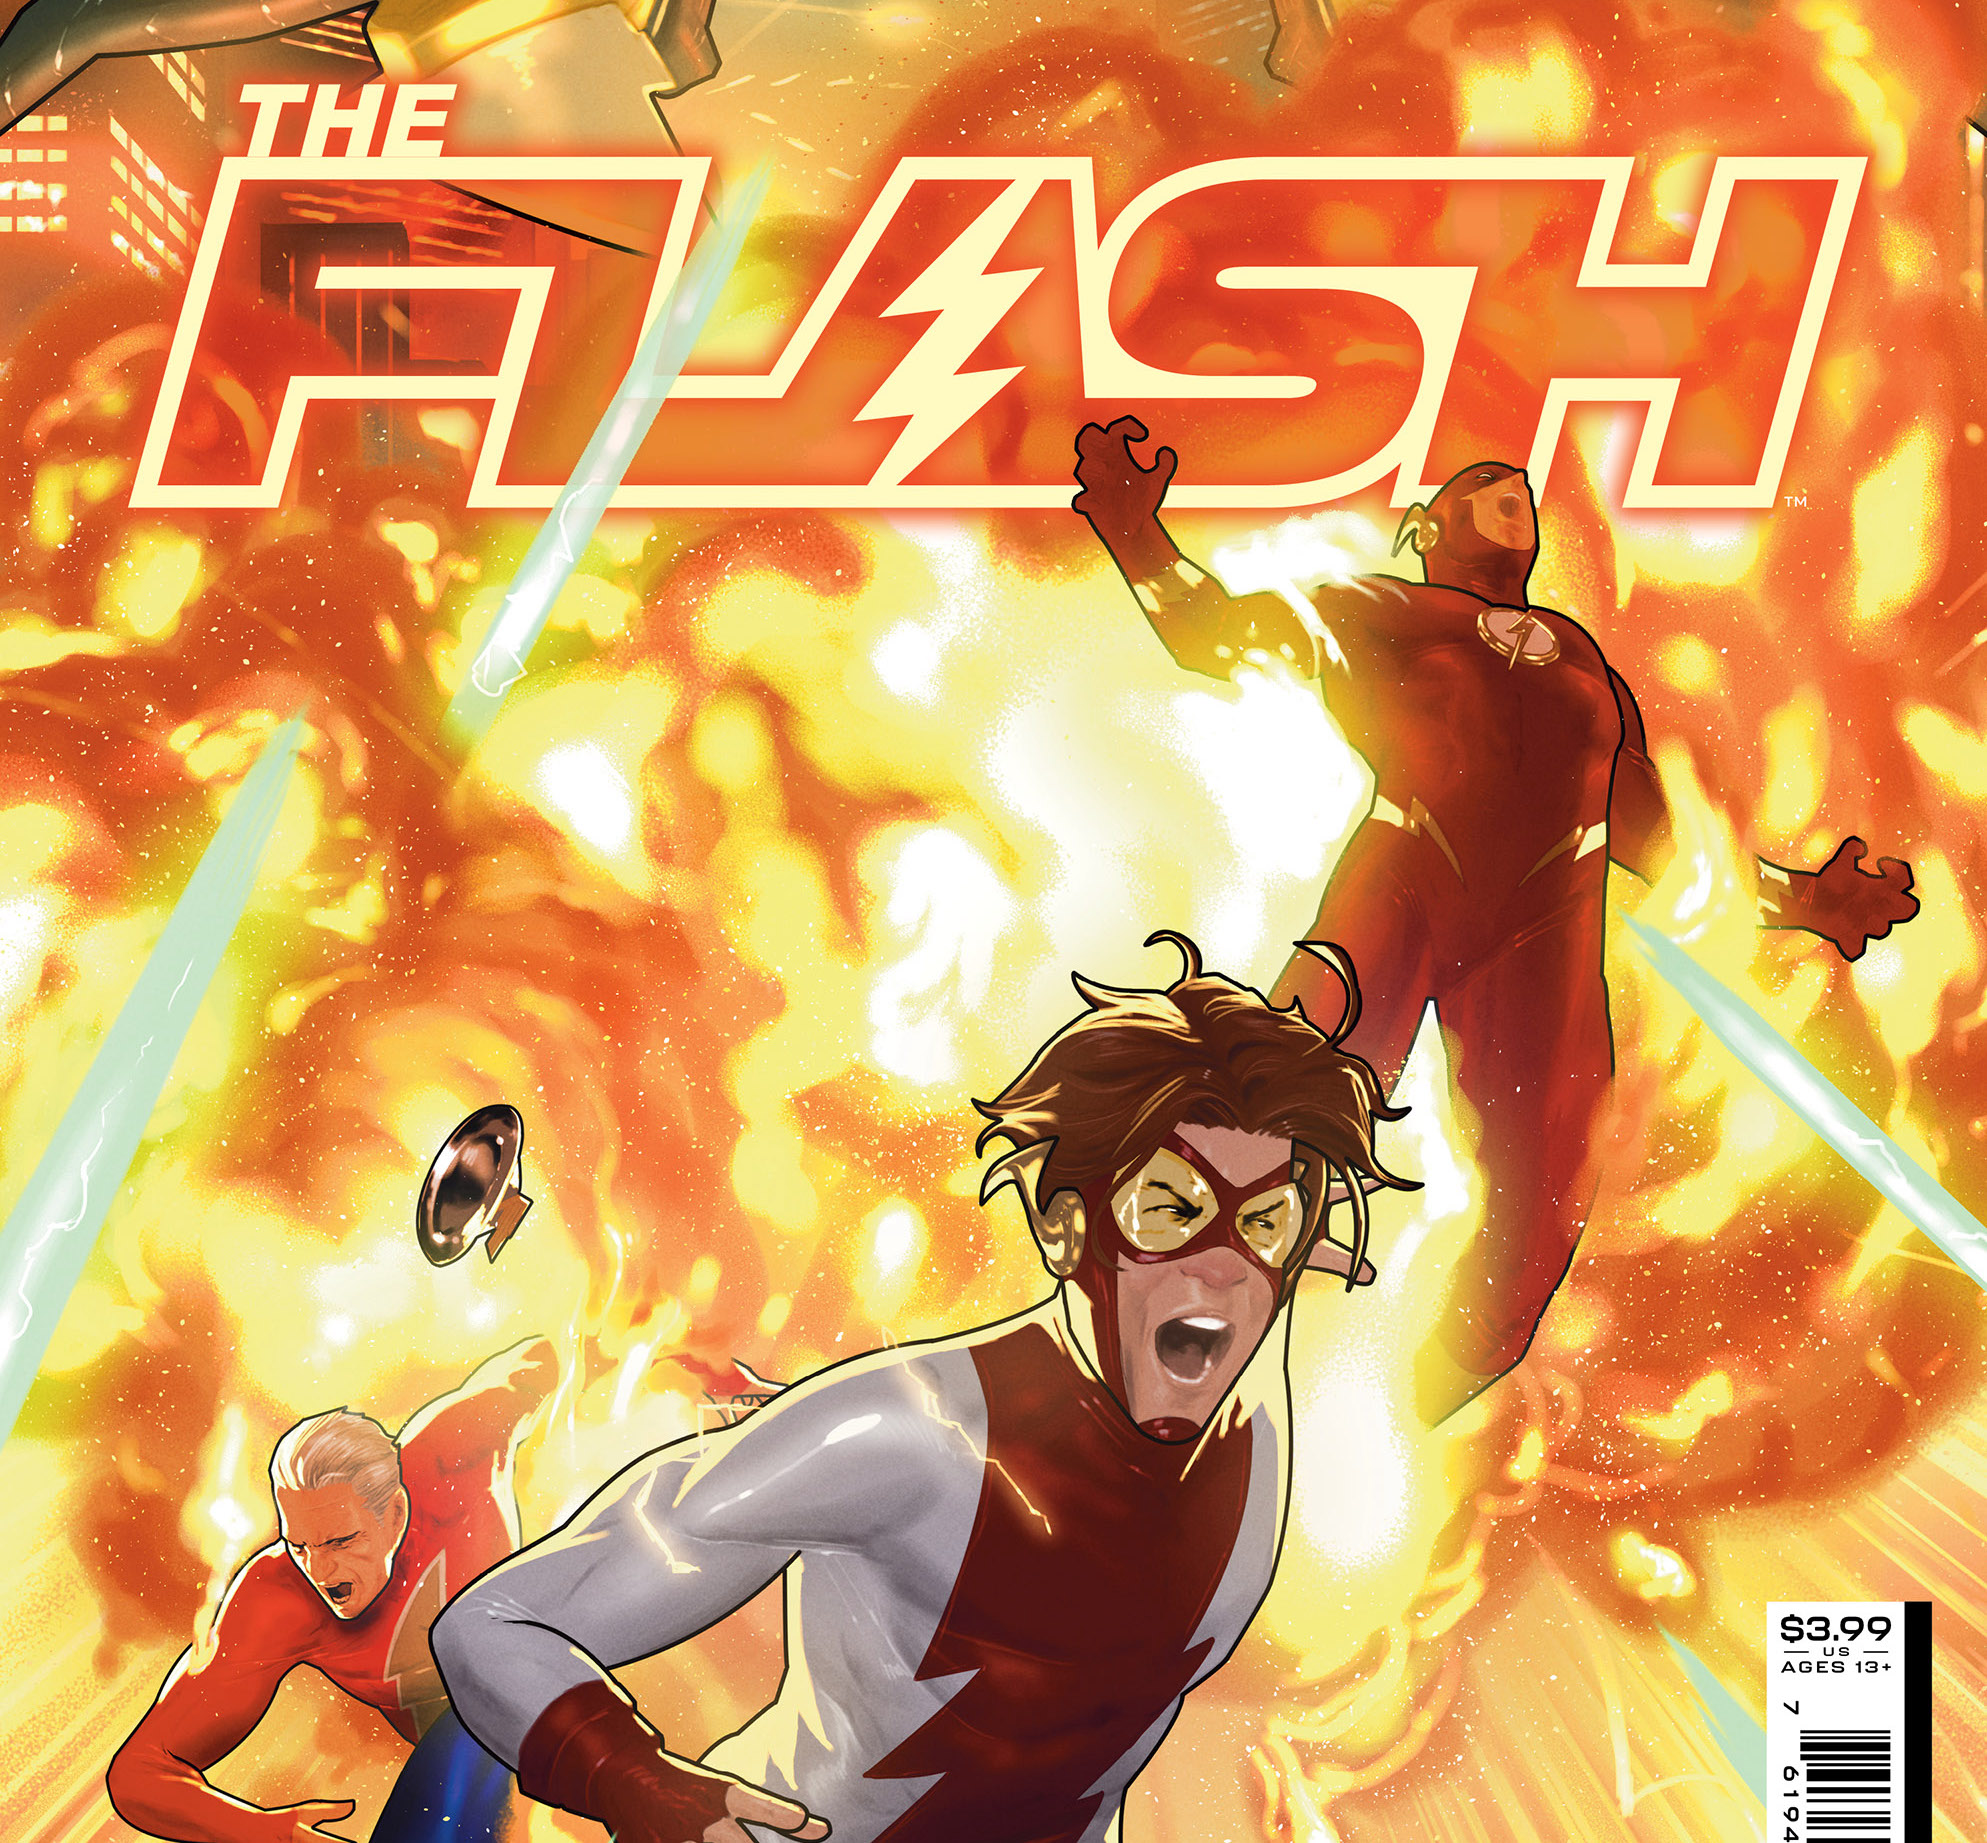 'The Flash' #790 sees a major Flash character die